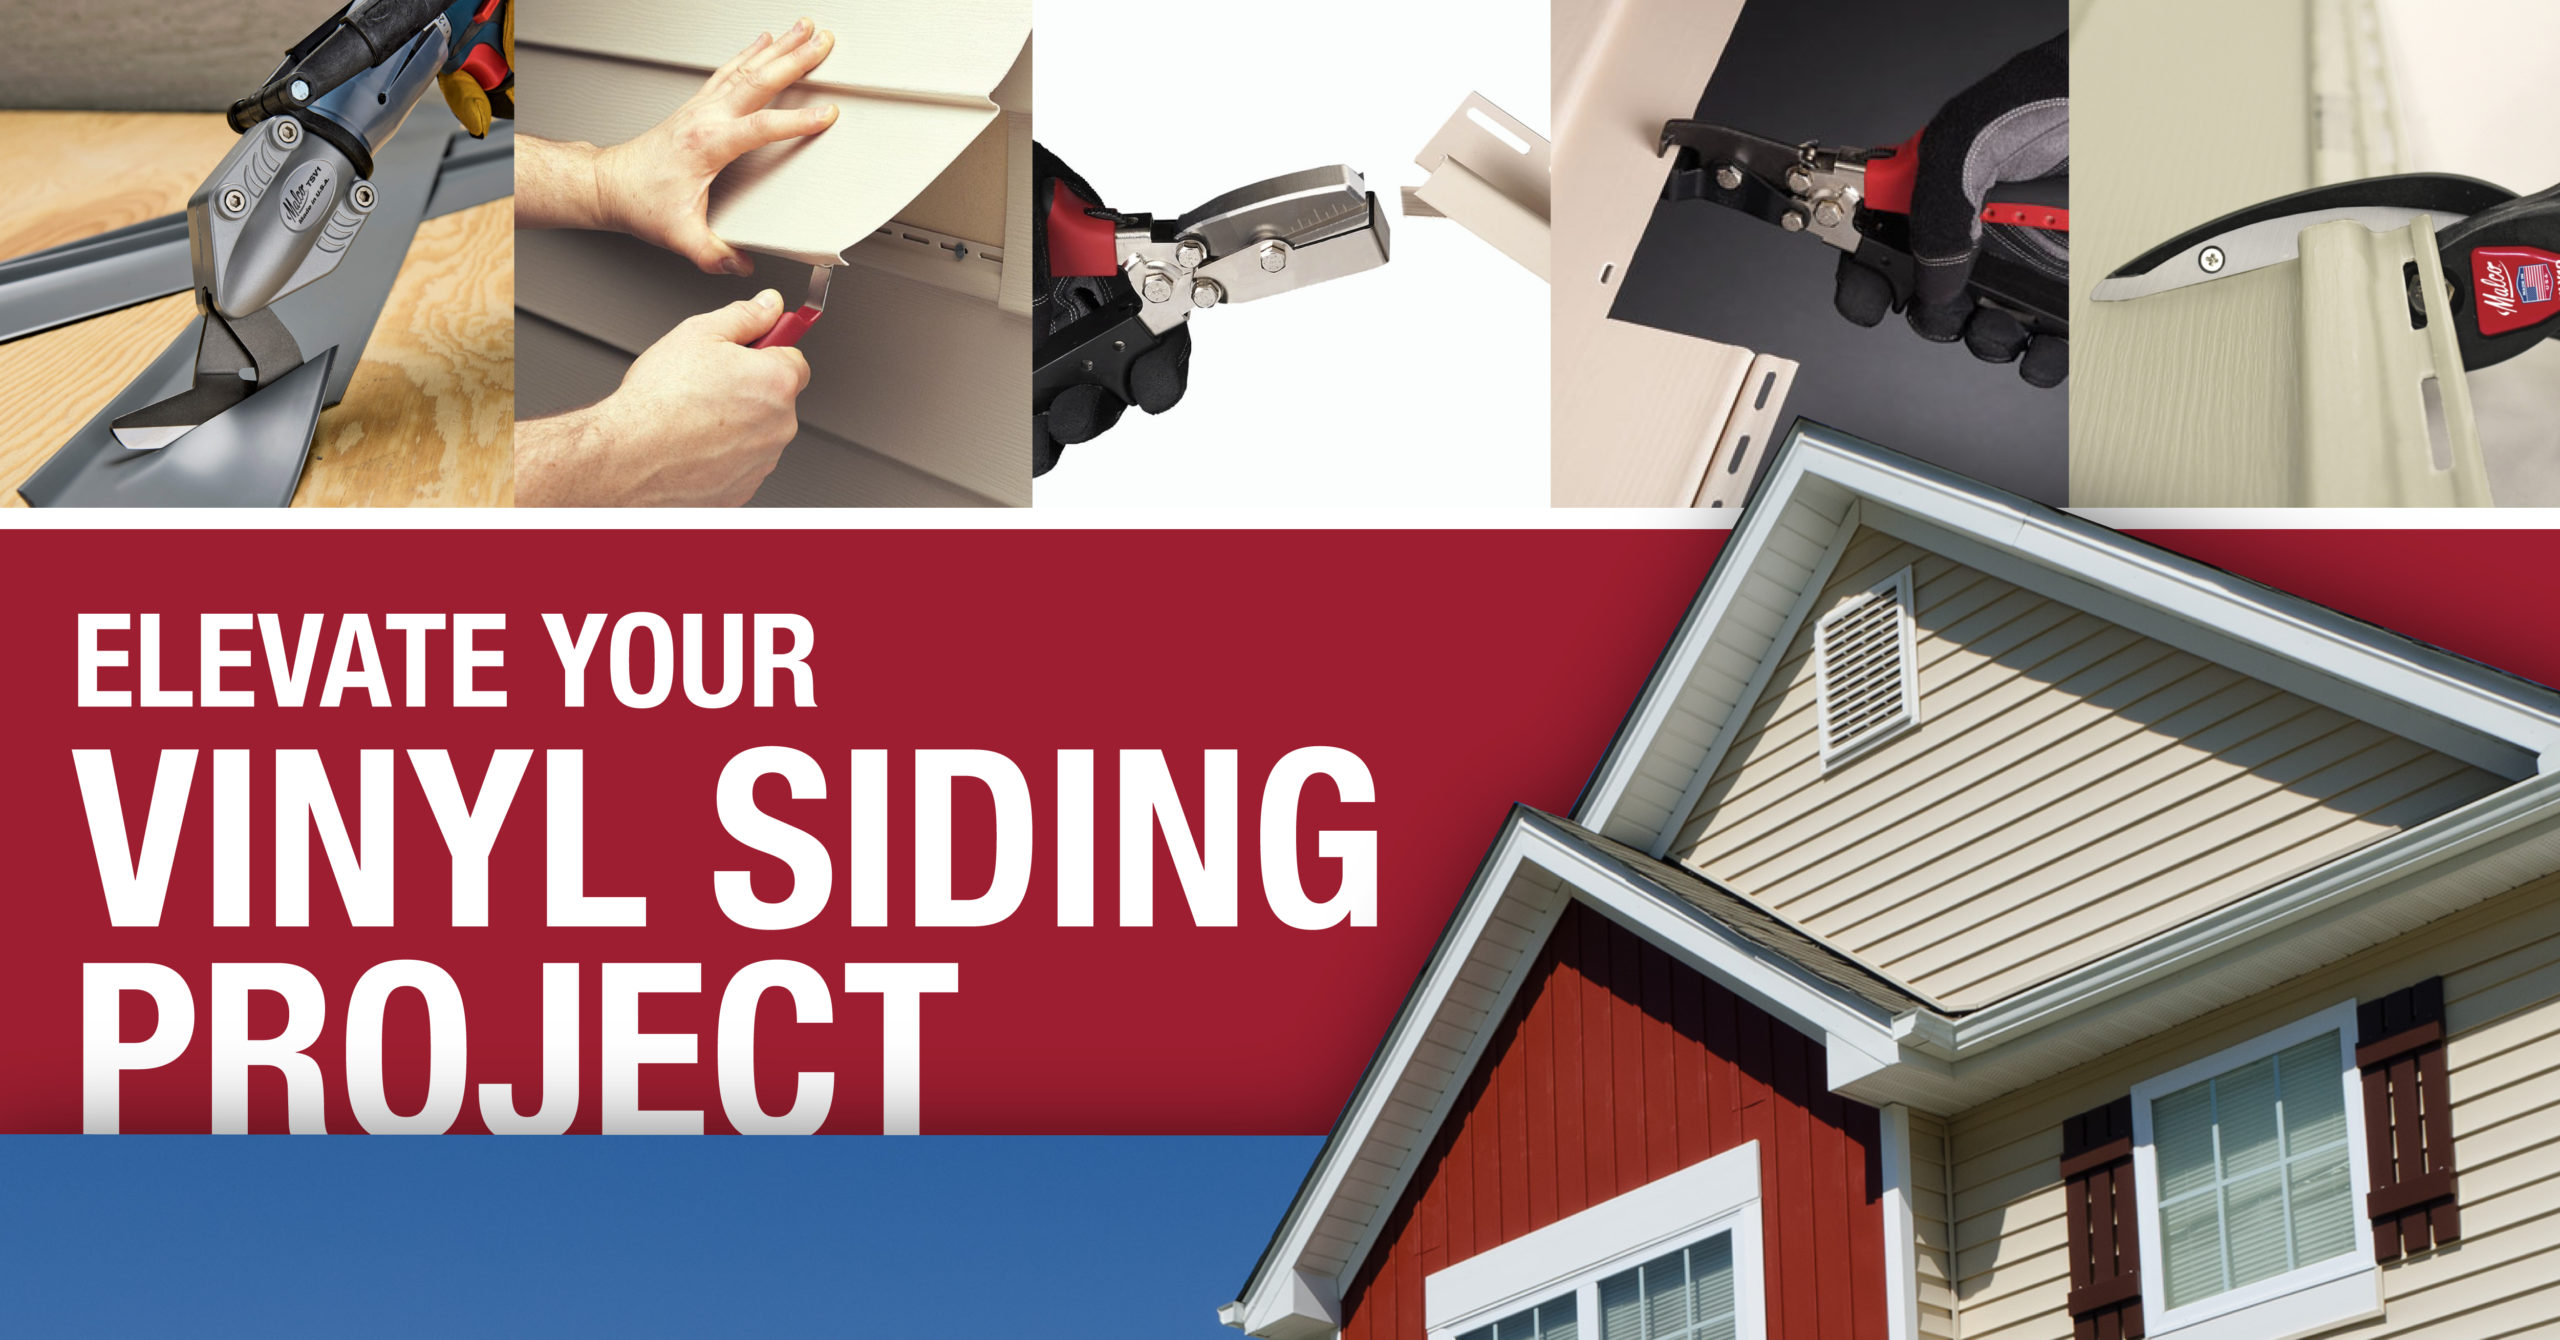 Elevate your vinyl siding project